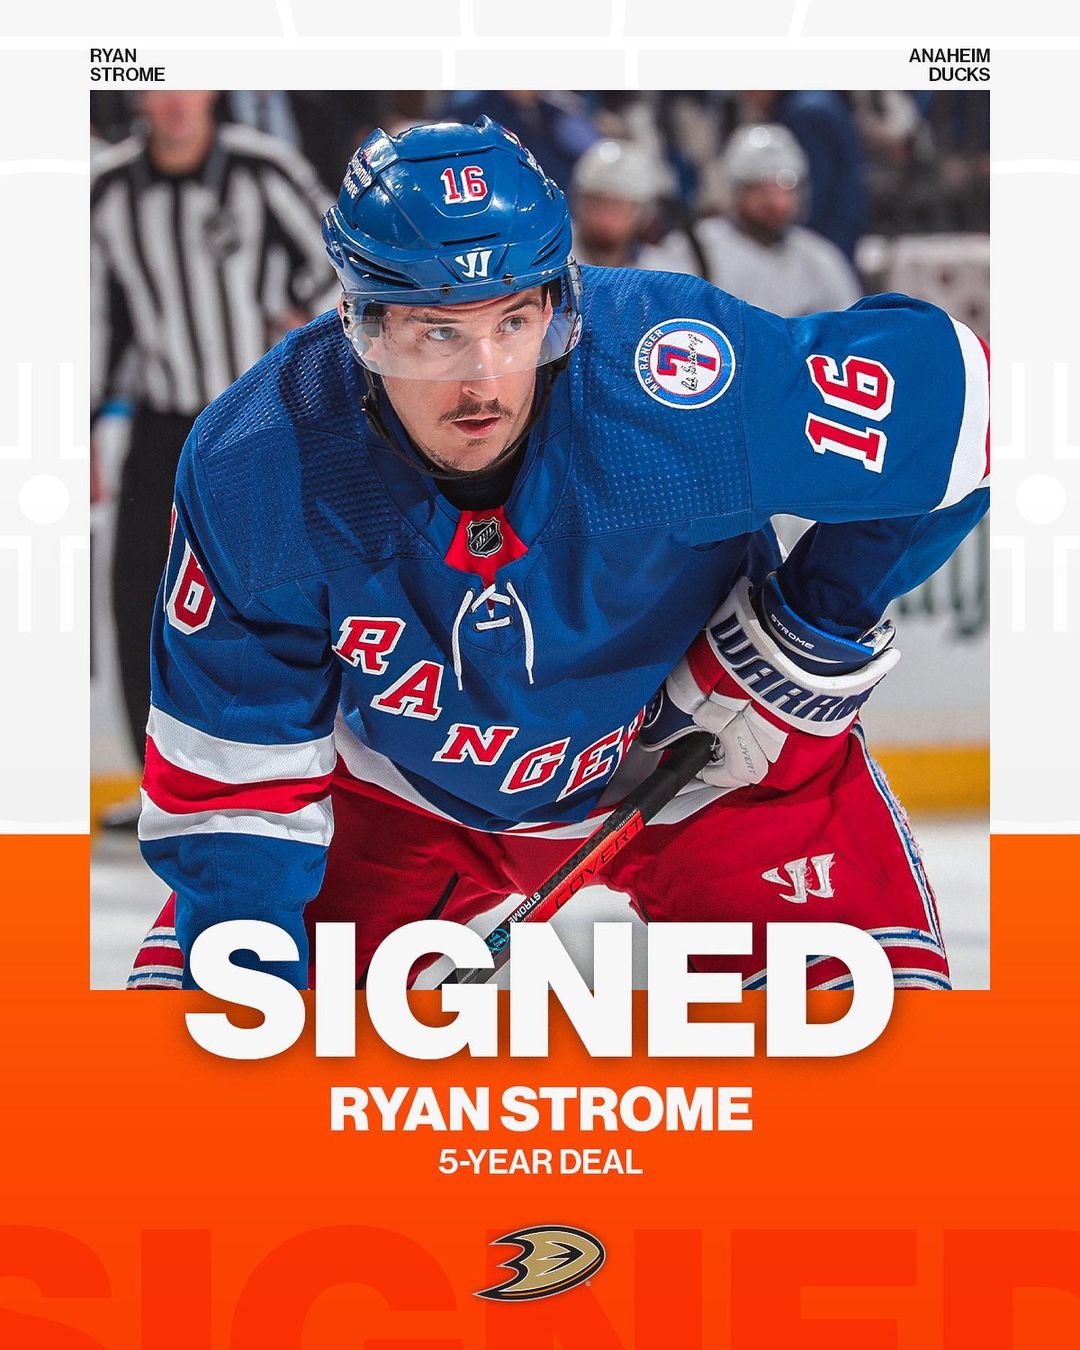 From the east coast to the west!  Ryan Strome scored a career-best 21 goals las...